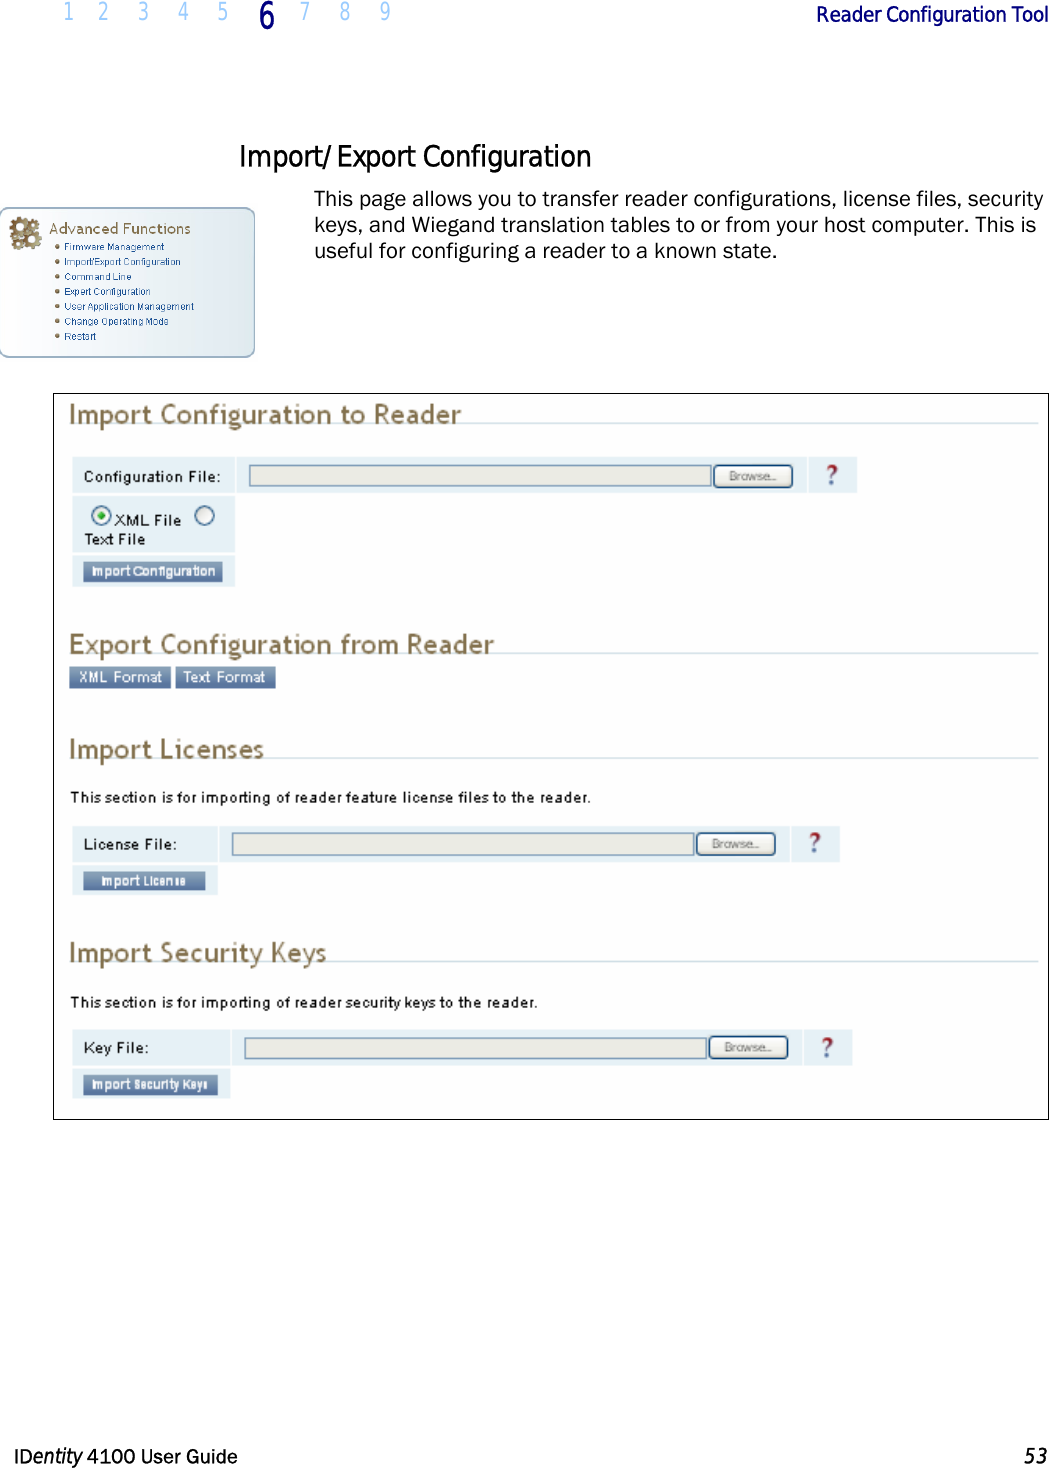  1 2 3 4 5 6 7 8 9       Reader Configuration Tool   IDentity 4100 User Guide  53  Import/Export Configuration  This page allows you to transfer reader configurations, license files, security keys, and Wiegand translation tables to or from your host computer. This is useful for configuring a reader to a known state.      